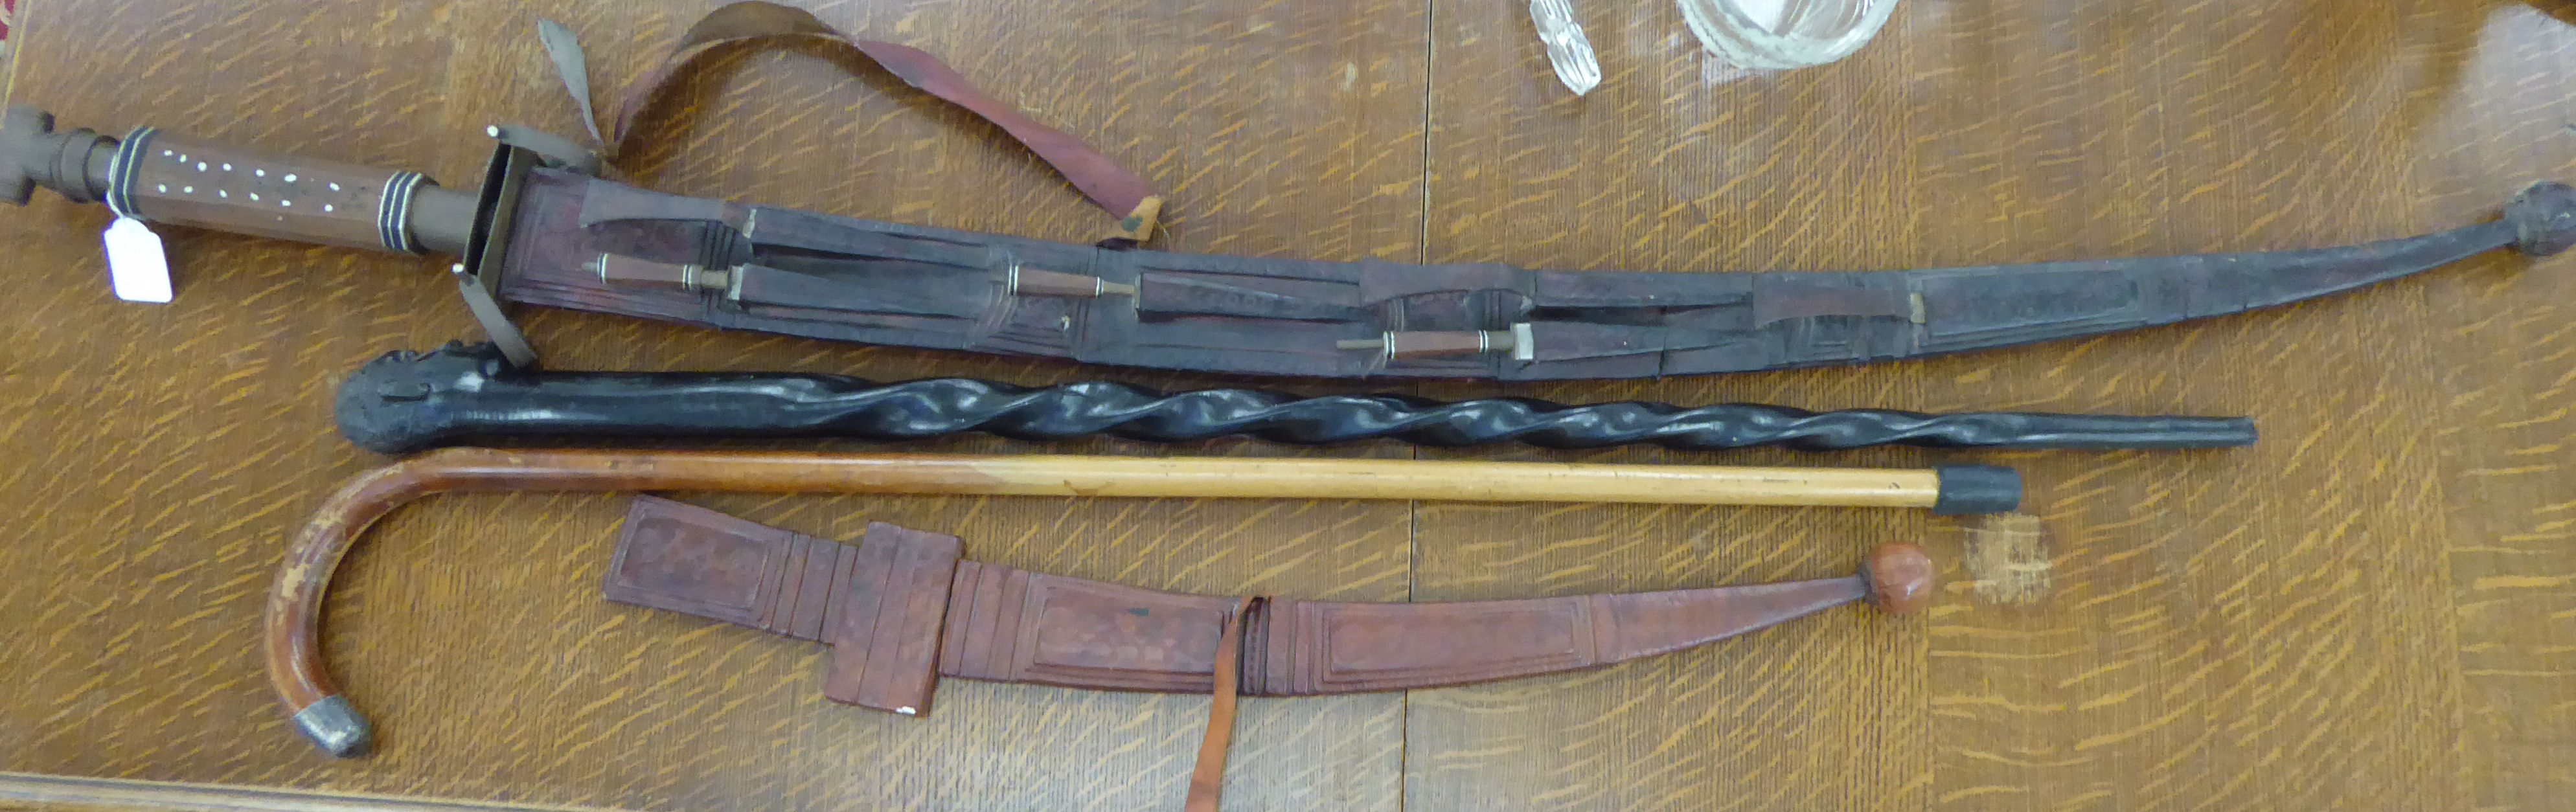 20thC edged weapons and walking aids: to include an Indian sword with a hide sheath the curved